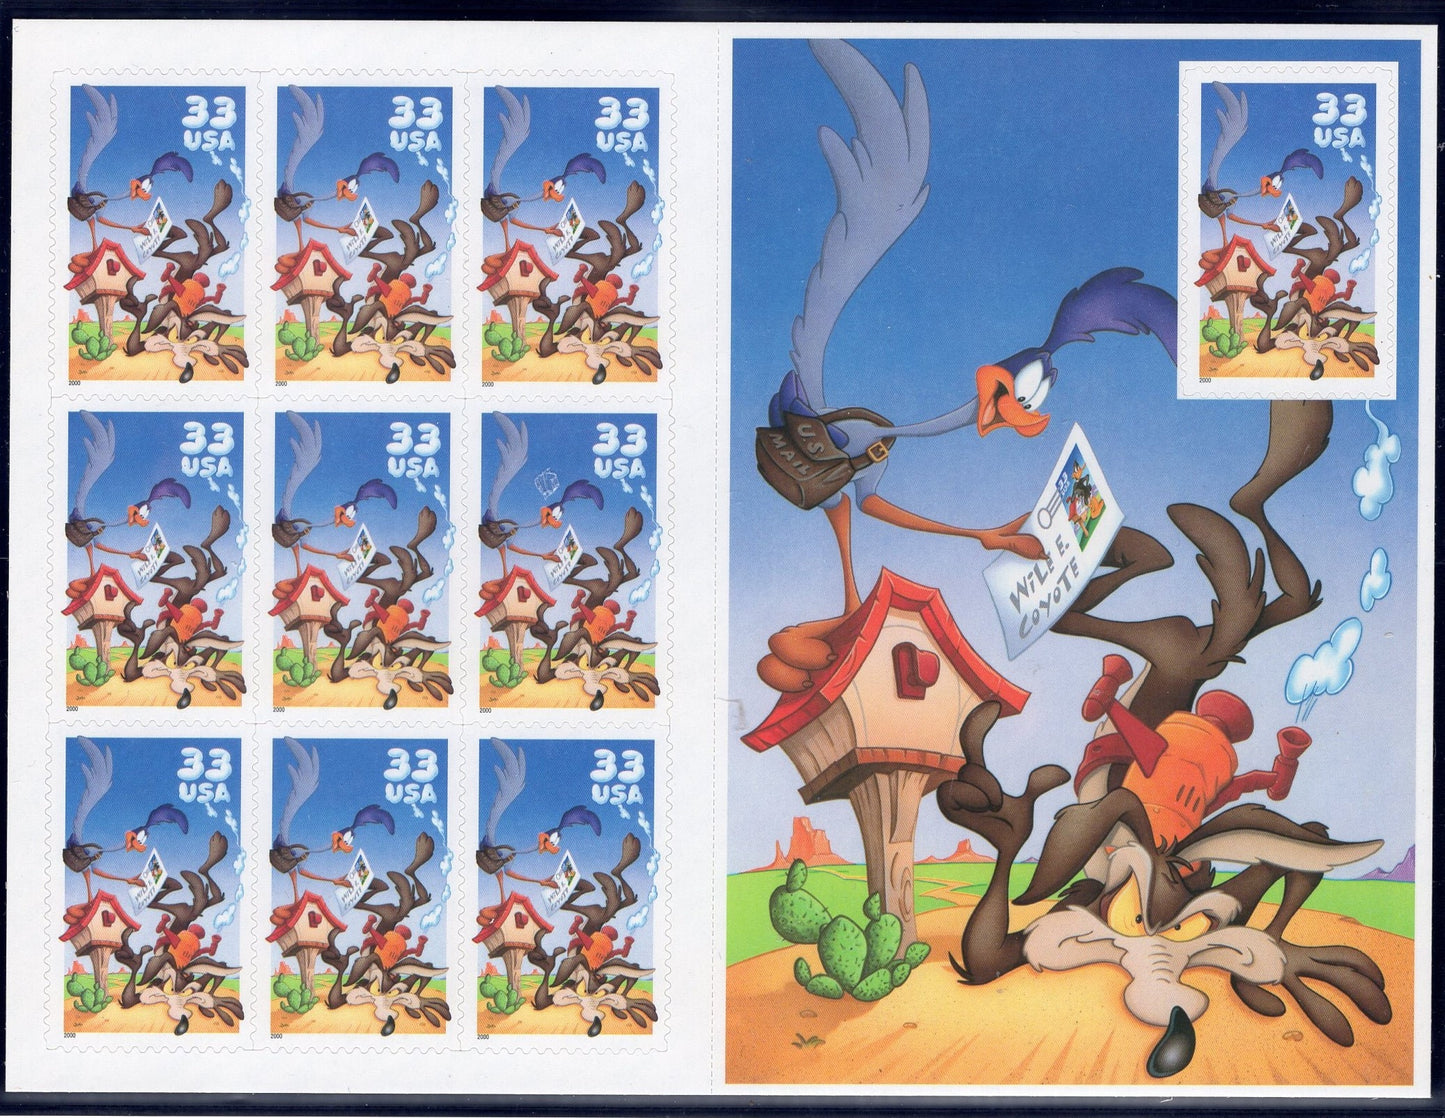 1 ROAD RUNNER COYOTE Sheet of 10 Looney Tunes Mailbox Bright, Bright Unused USA Postage Stamps - Issued in 2000 - s3391-